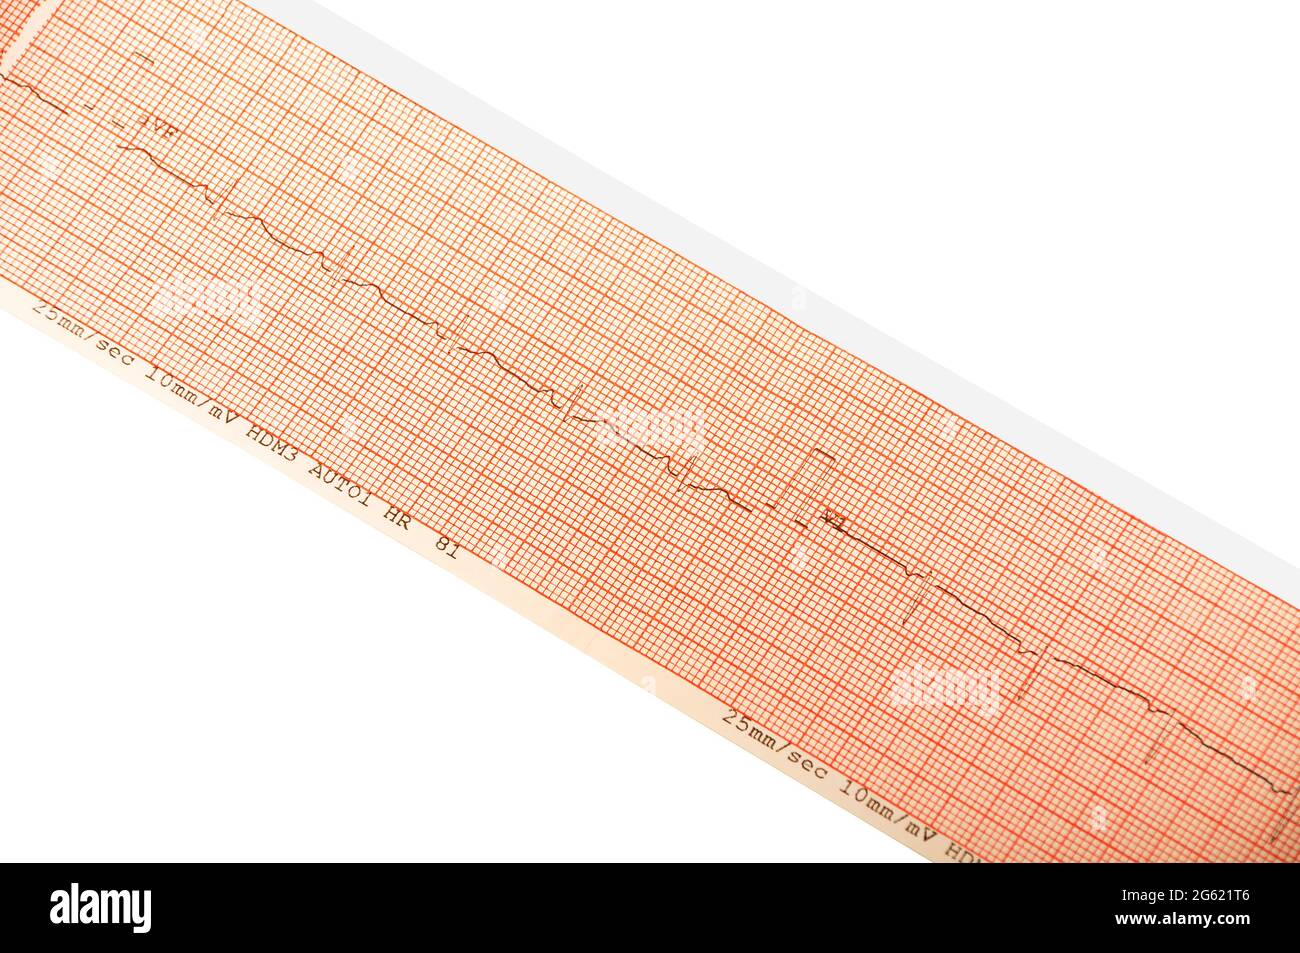 ECG test results on millimeter paper, heart rhythm results, close up of ECG Graph details Stock Photo